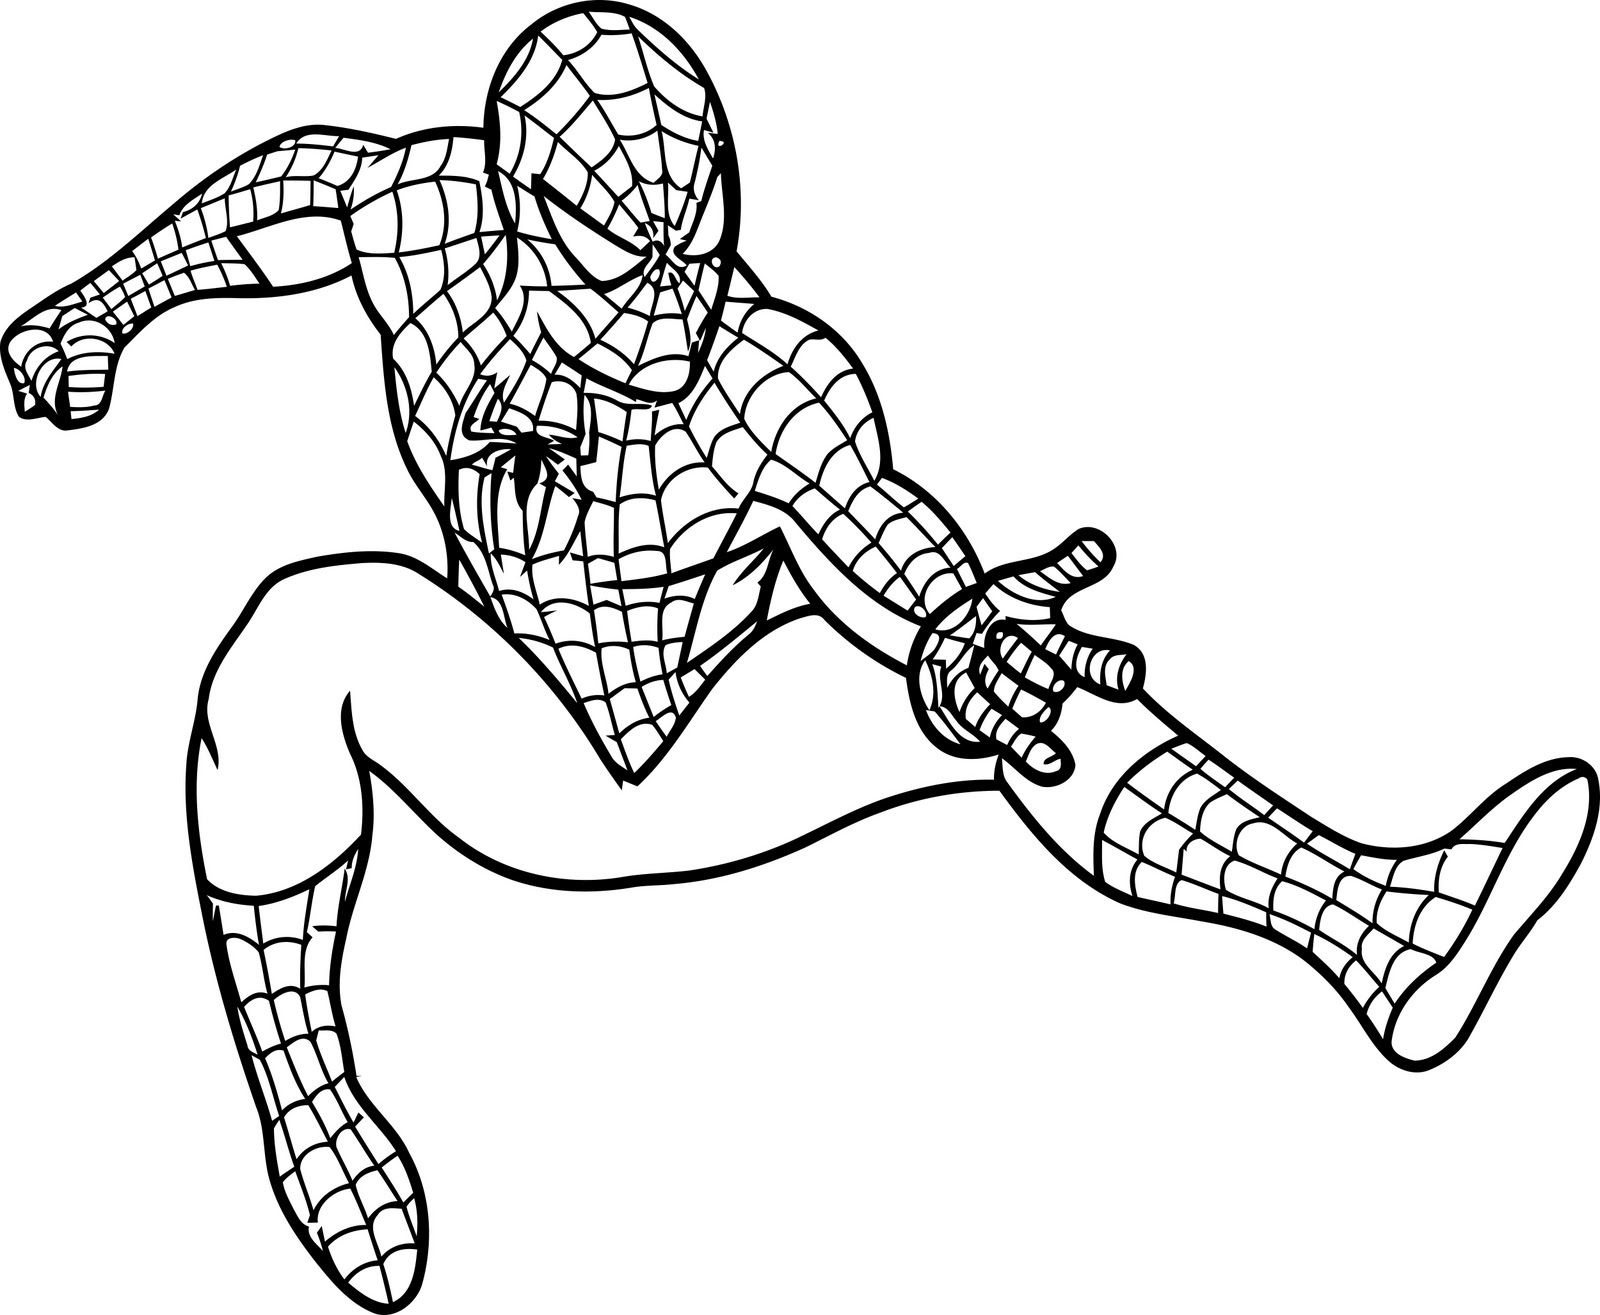 Free Printable Spiderman Coloring Pages For Kids | Projects To Try - Free Printable Spiderman Pictures